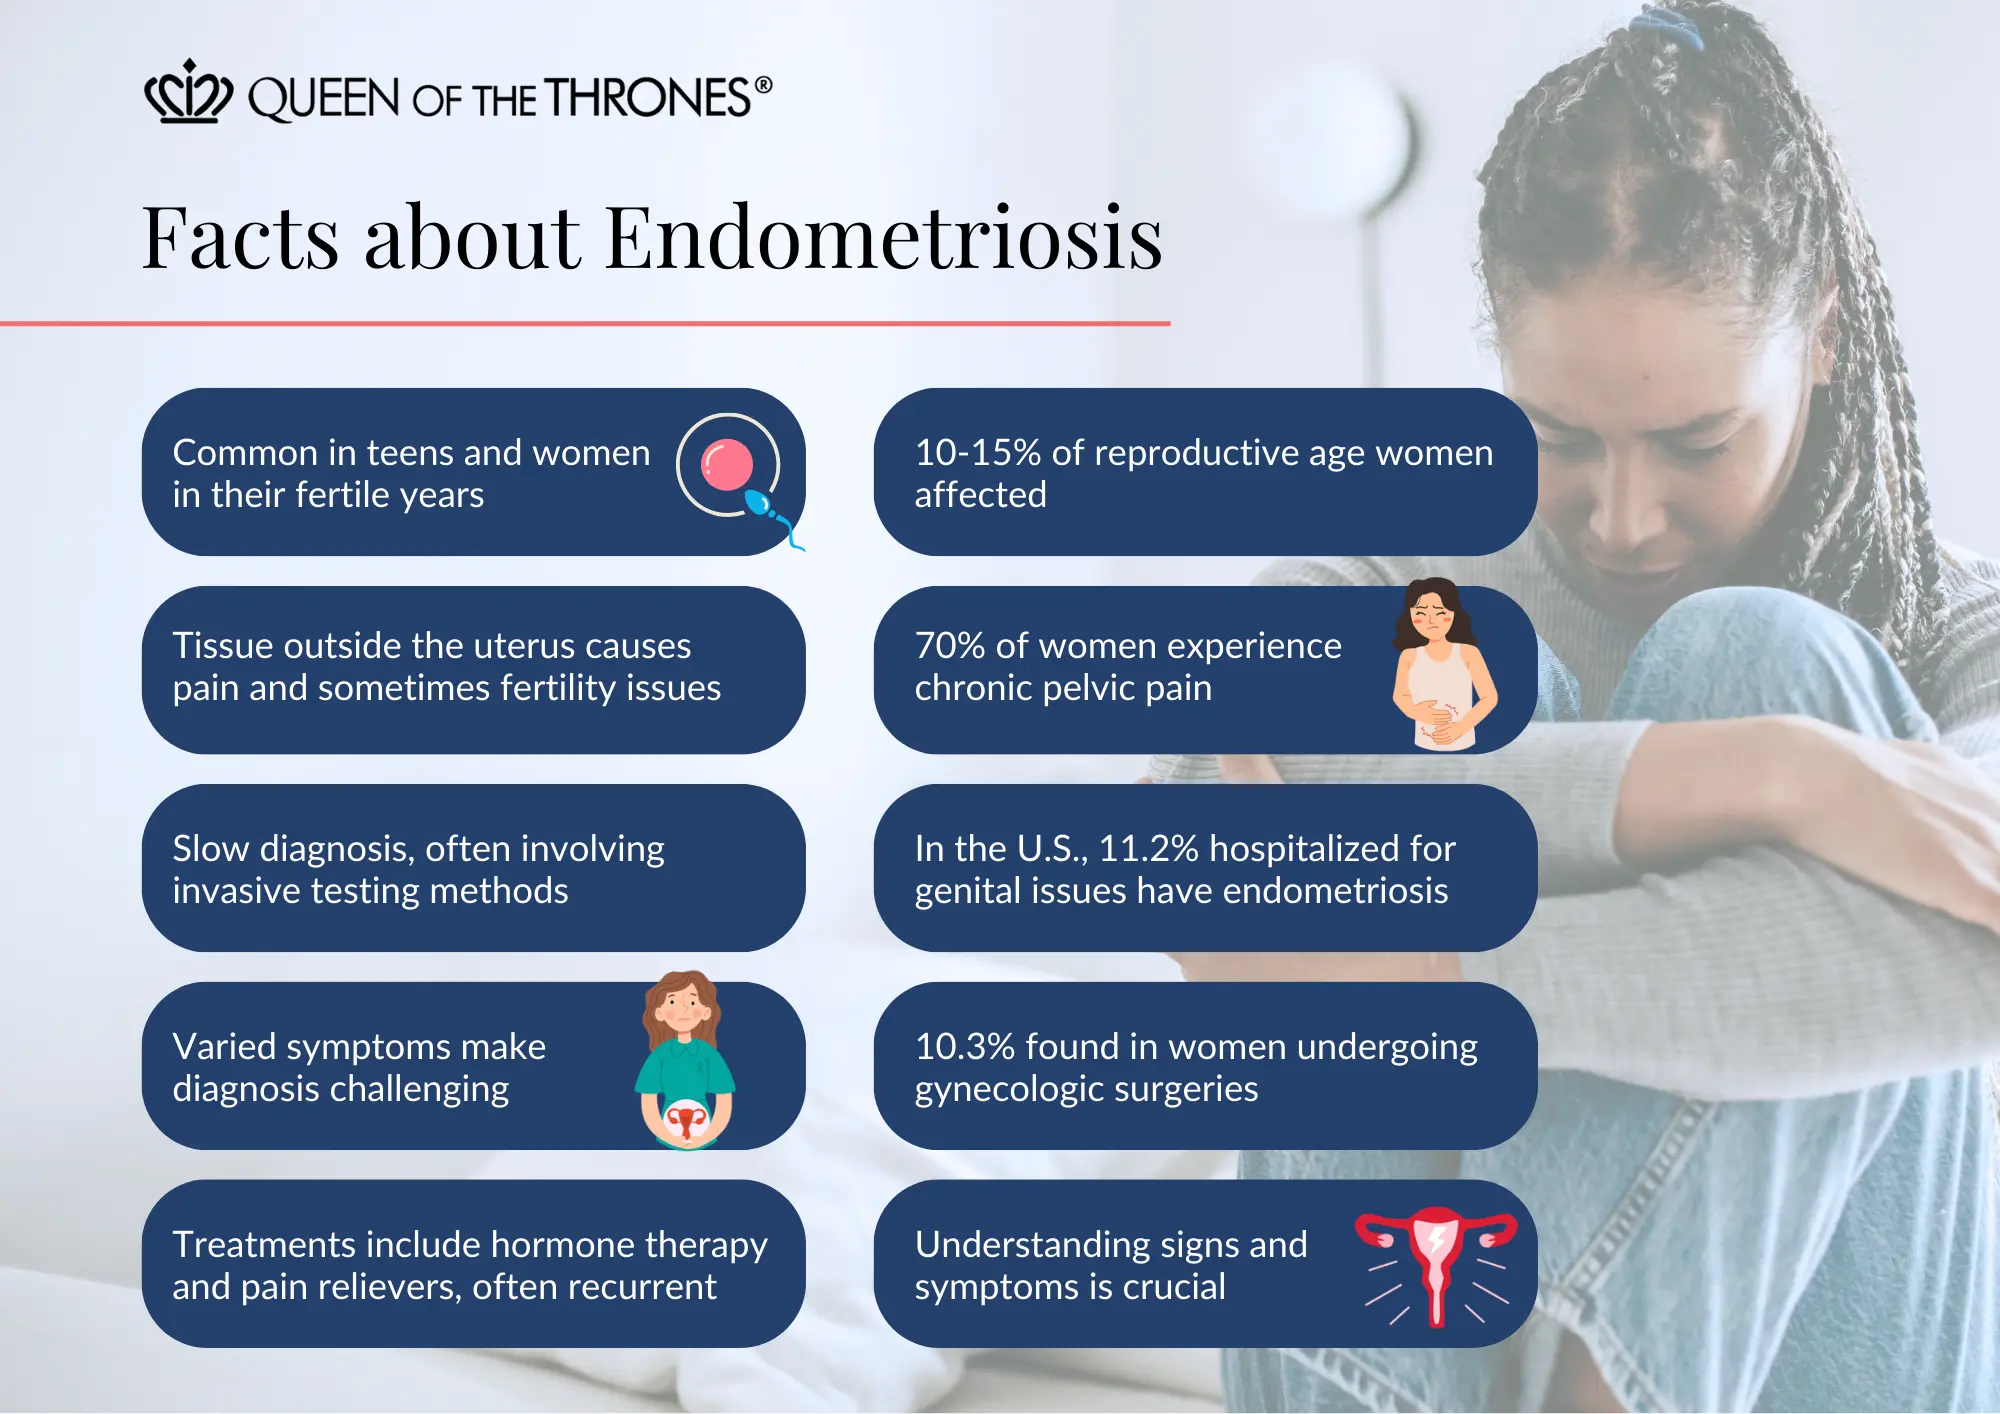 Facts about endometriosis by Queen of the Thrones